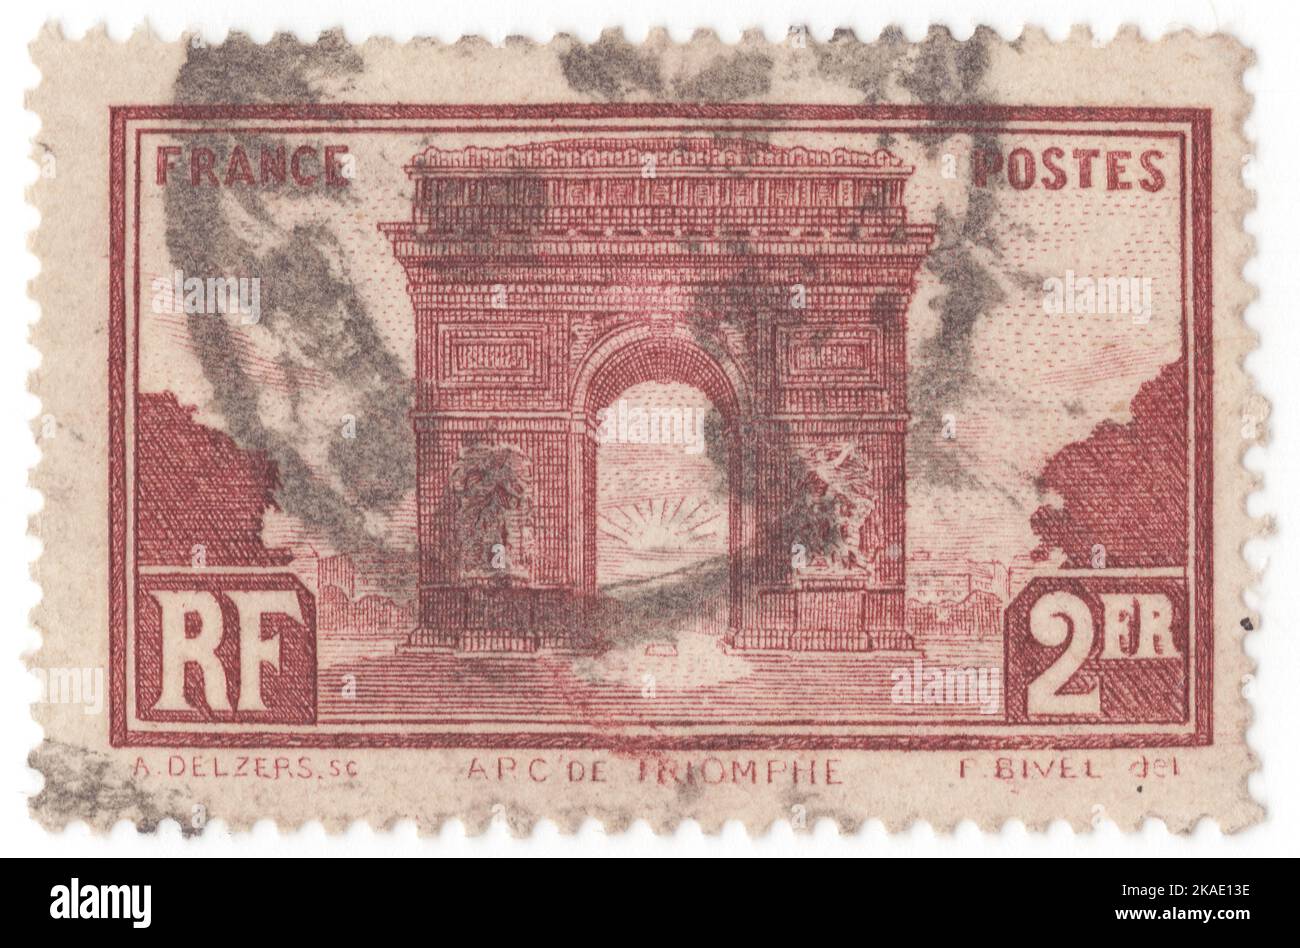 FRANCE - 1931: An 2 francs red-brown postage stamp depicting Arc de Triomphe, is one of the most famous monuments in Paris, standing at the western end of the Champs-Elysees at the centre of Place Charles de Gaulle. The Arc de Triomphe honours those who fought and died for France in the French Revolutionary and Napoleonic Wars, with the names of all French victories and generals inscribed on its inner and outer surfaces. Beneath its vault lies the Tomb of the Unknown Soldier from World War I Stock Photo